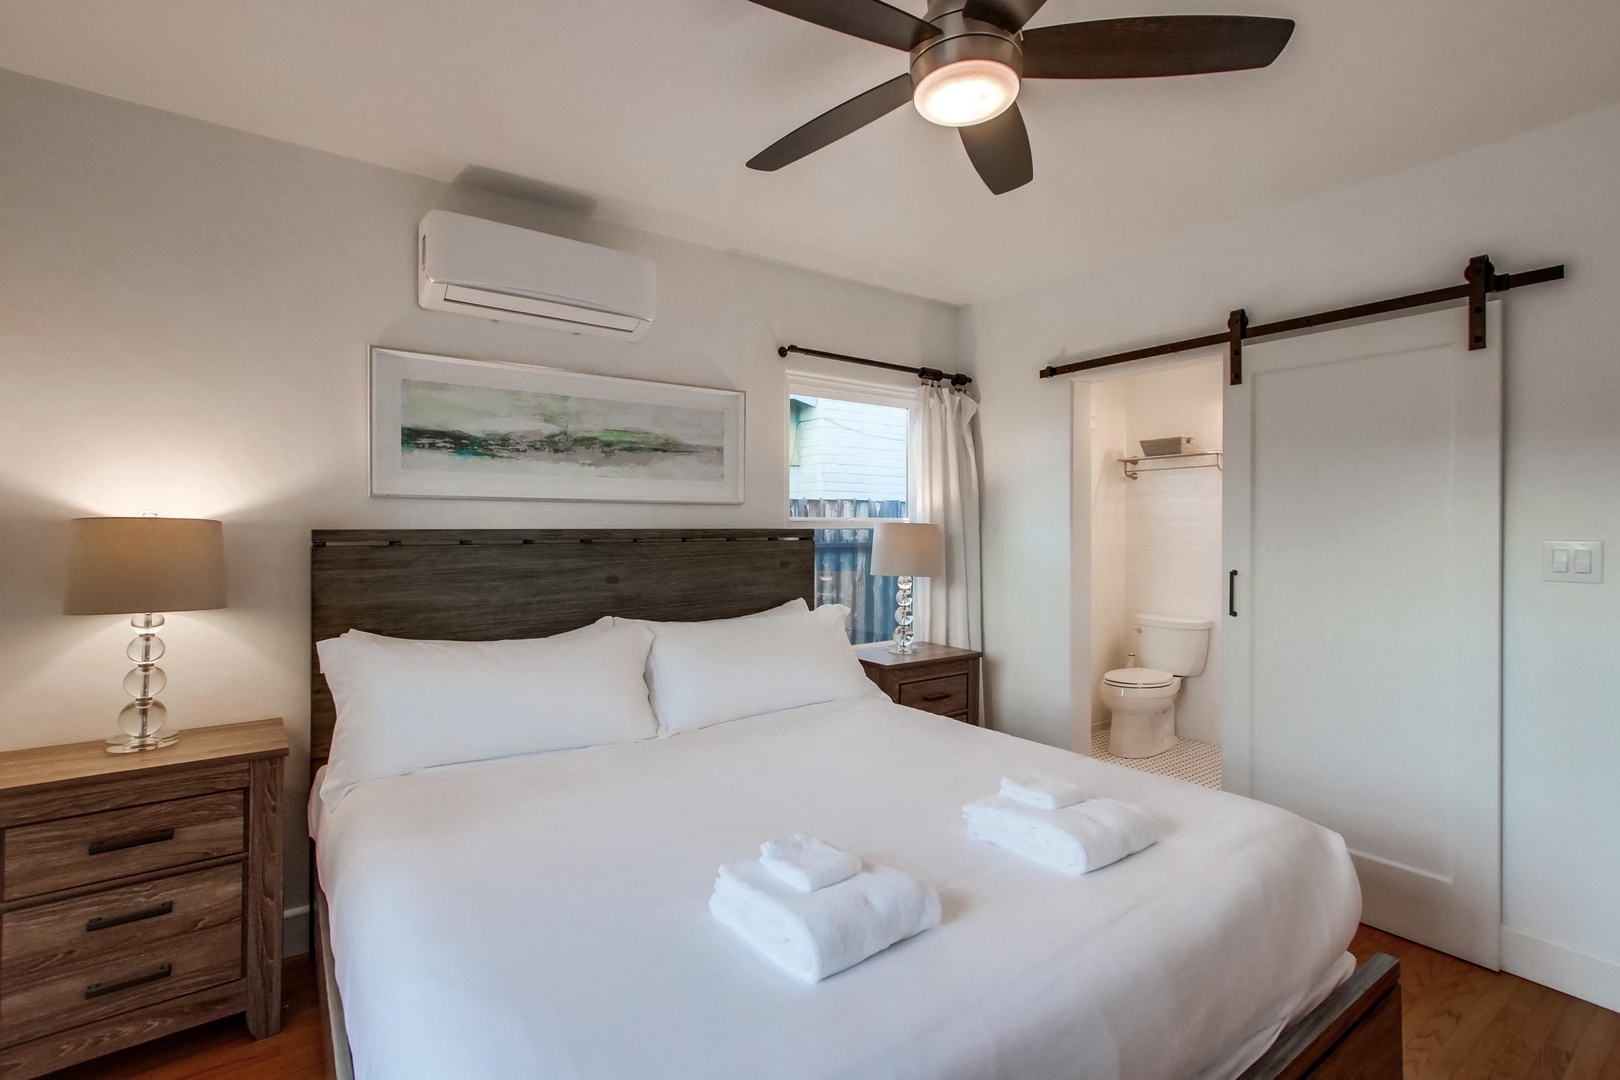 The suite features a TV and ceiling fan